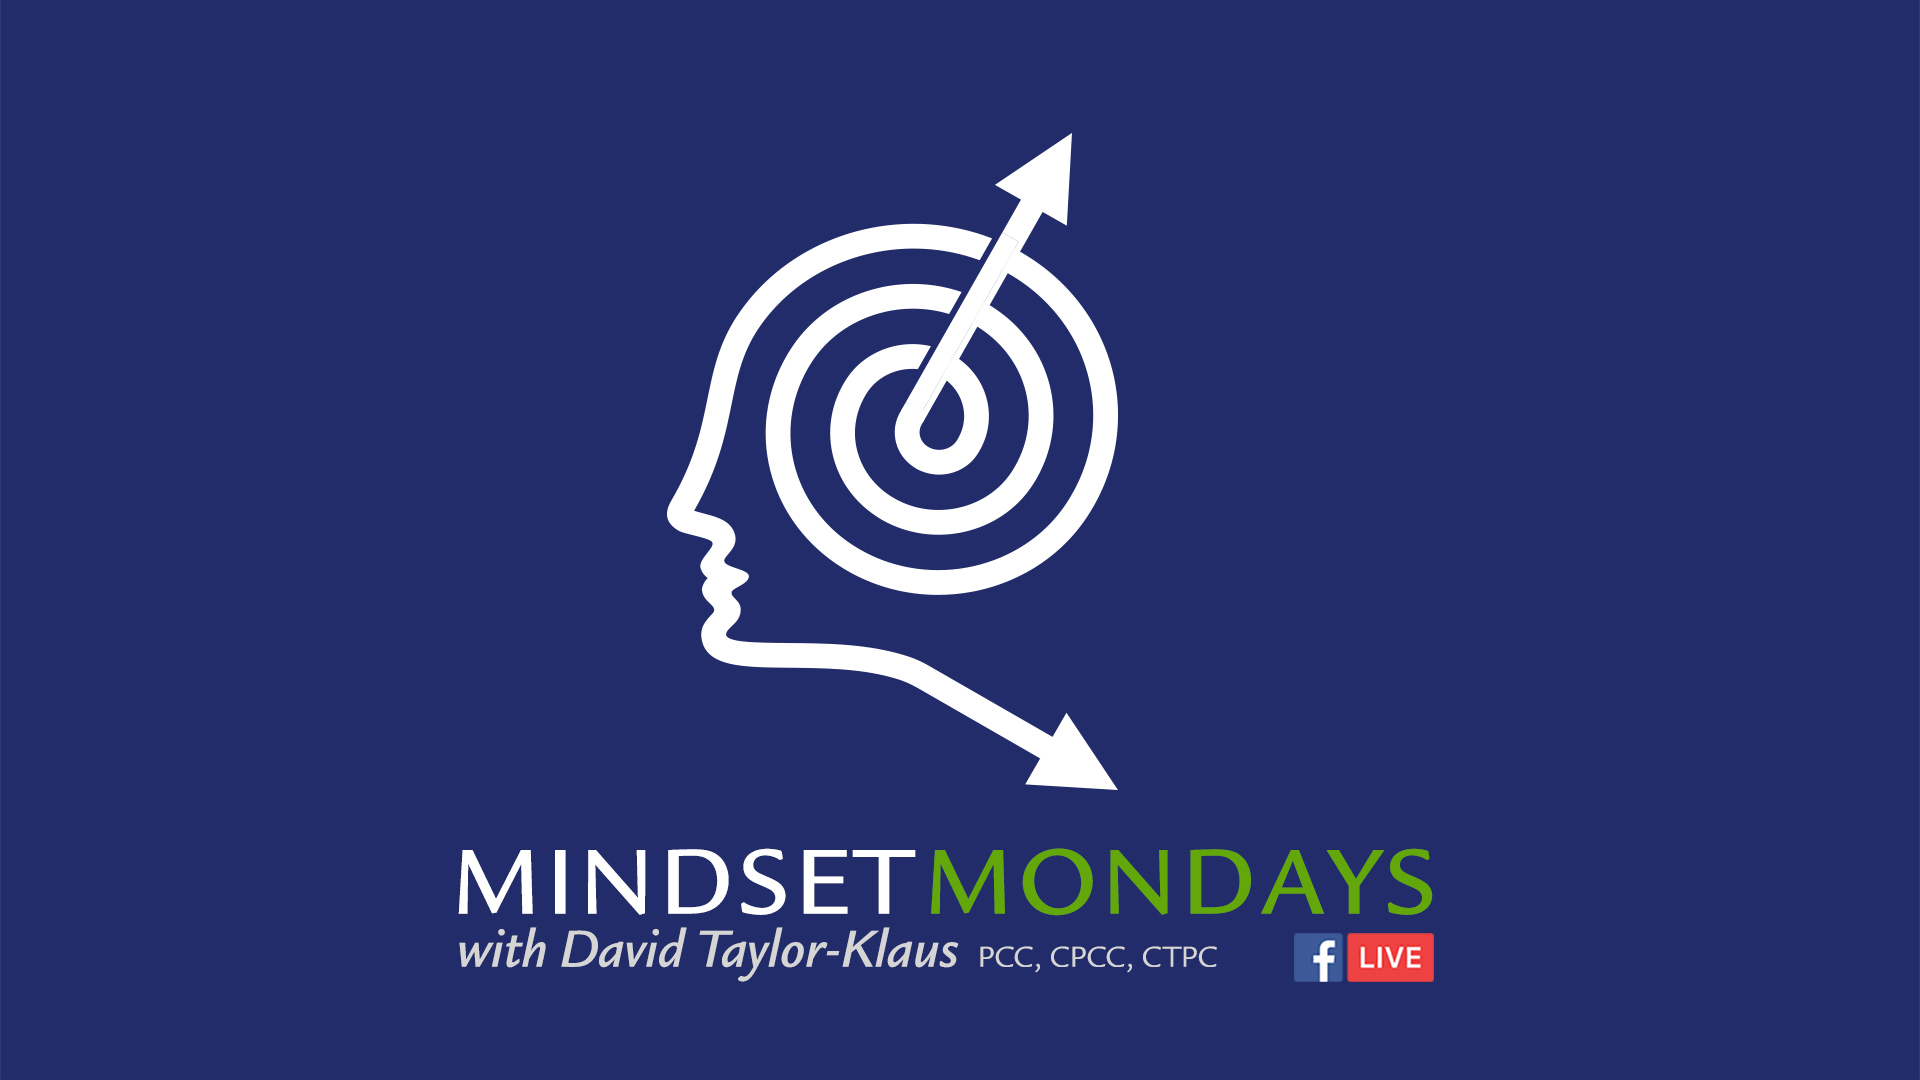 Episode 003: It’s part of your life because you keep thinking about it